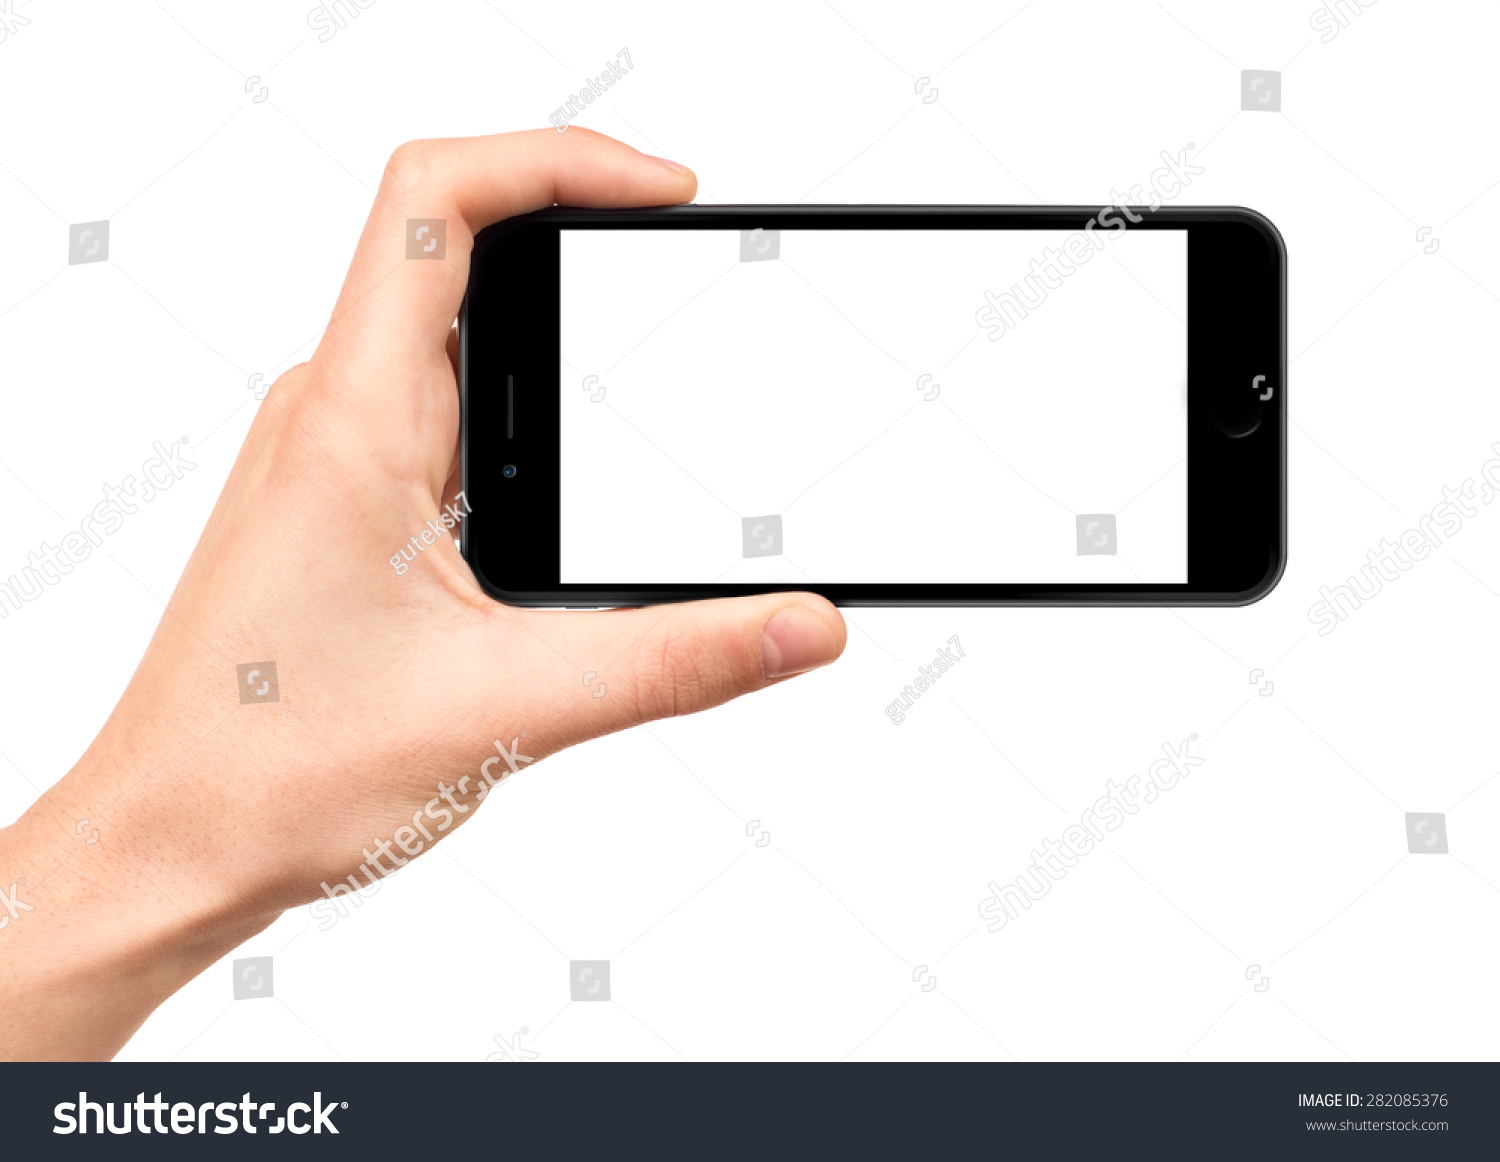 Man hand holding horizontal the black smartphone with blank screen, isolated on white background. #282085376